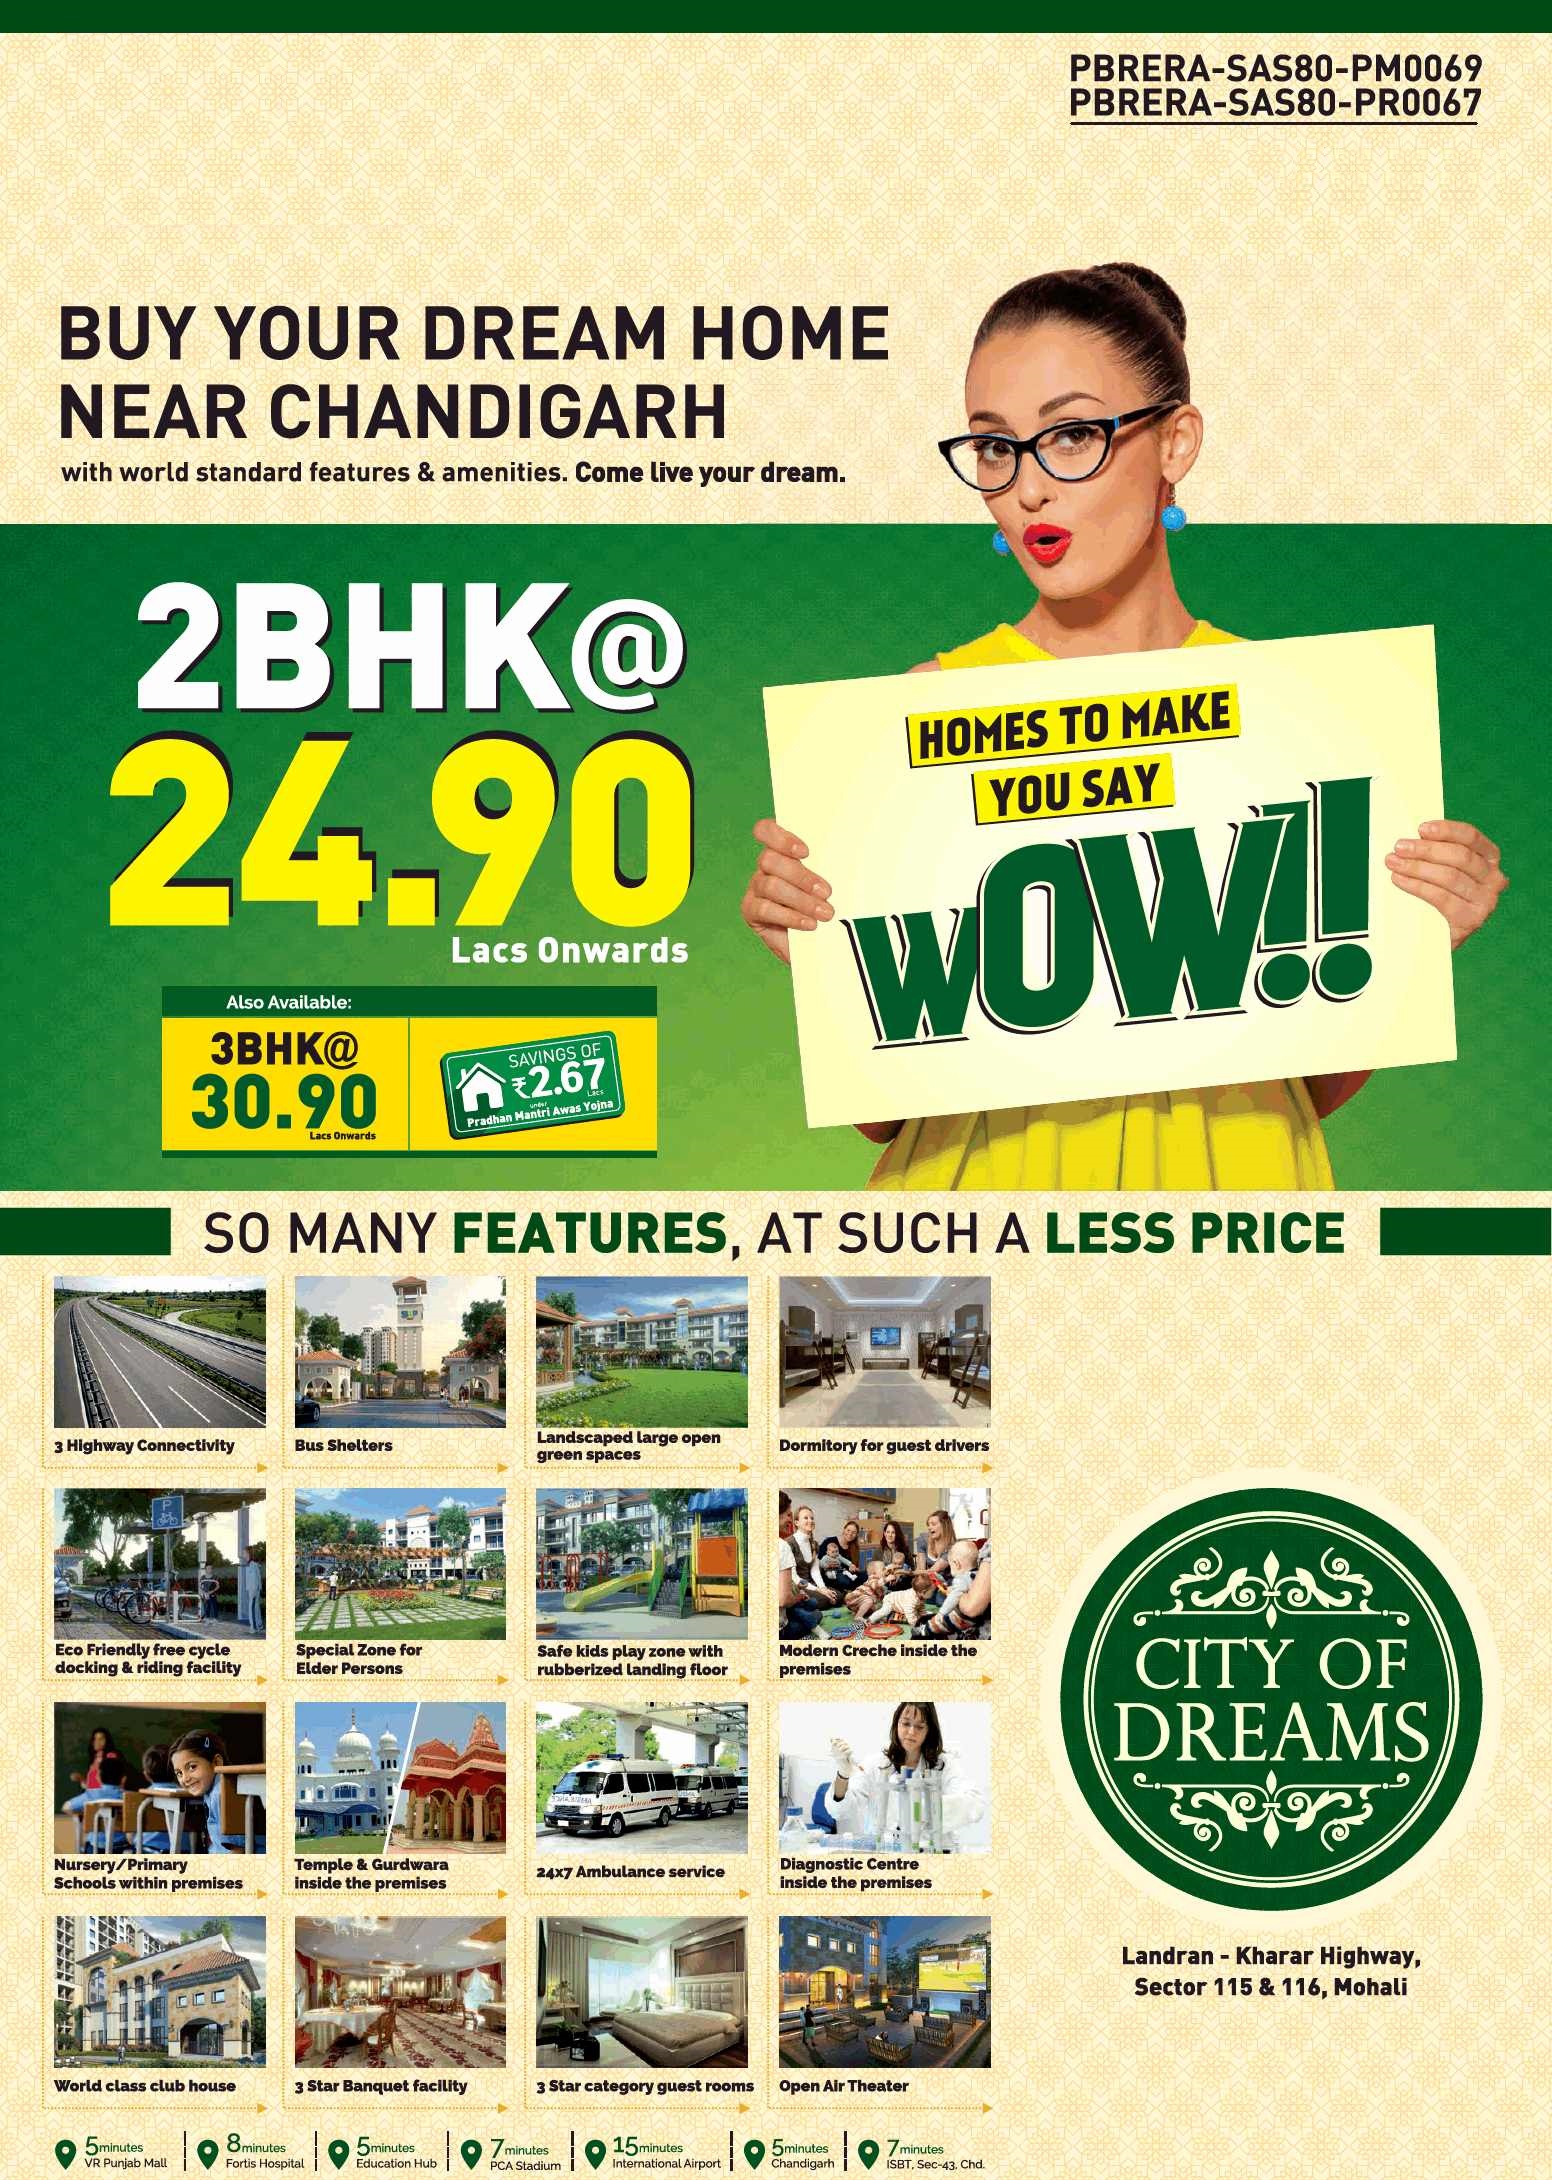 Book your dream home with worlds standard features & amenities at SBP City of Dreams in Mohali Update